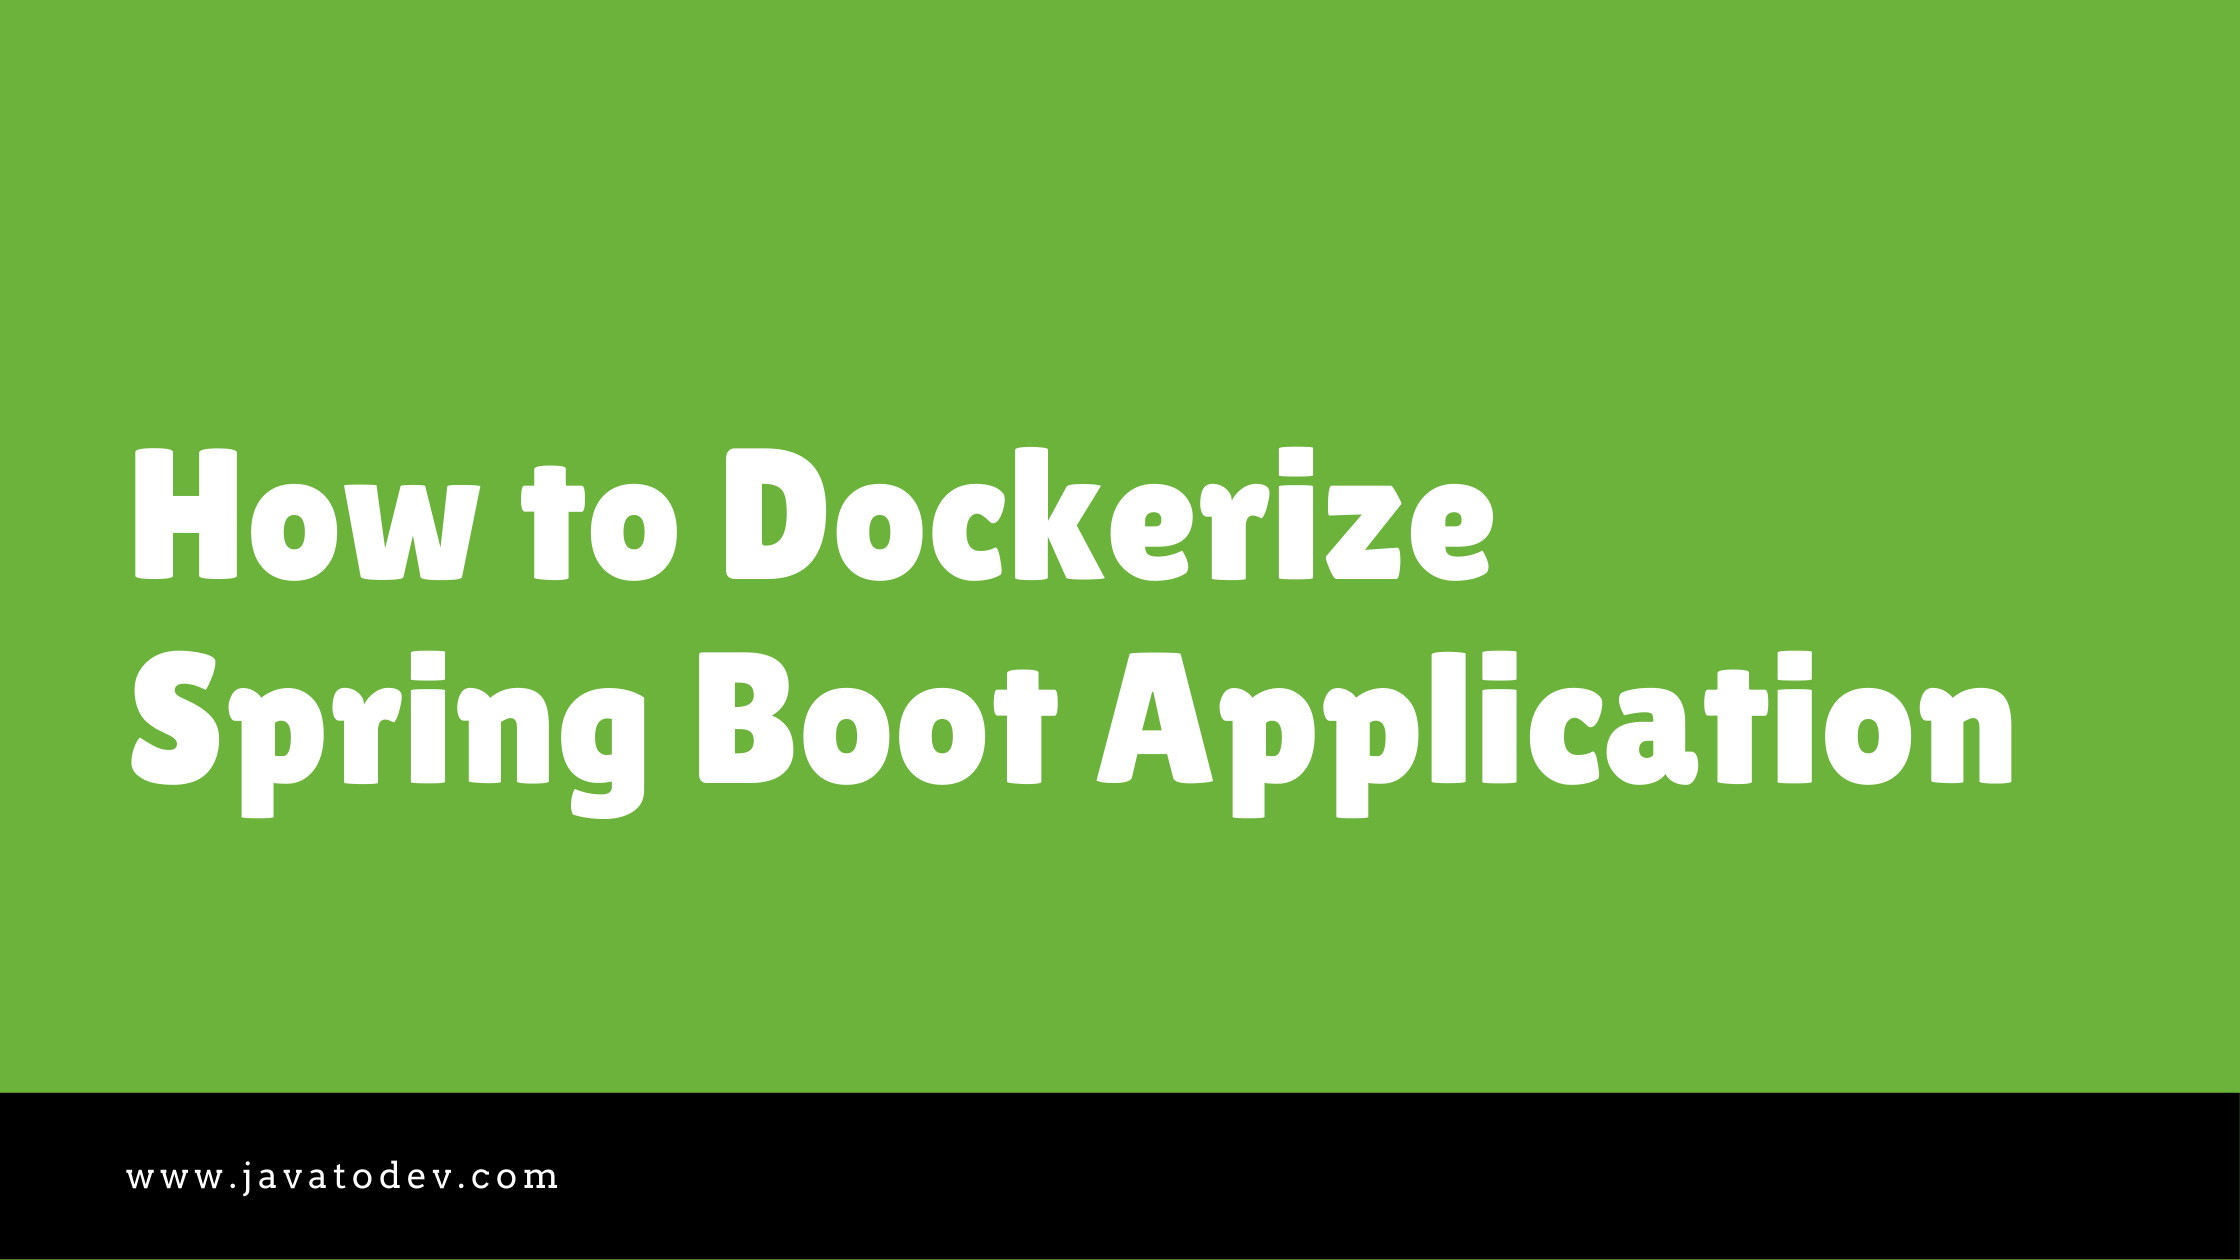 How to Dockerize Spring Boot Application